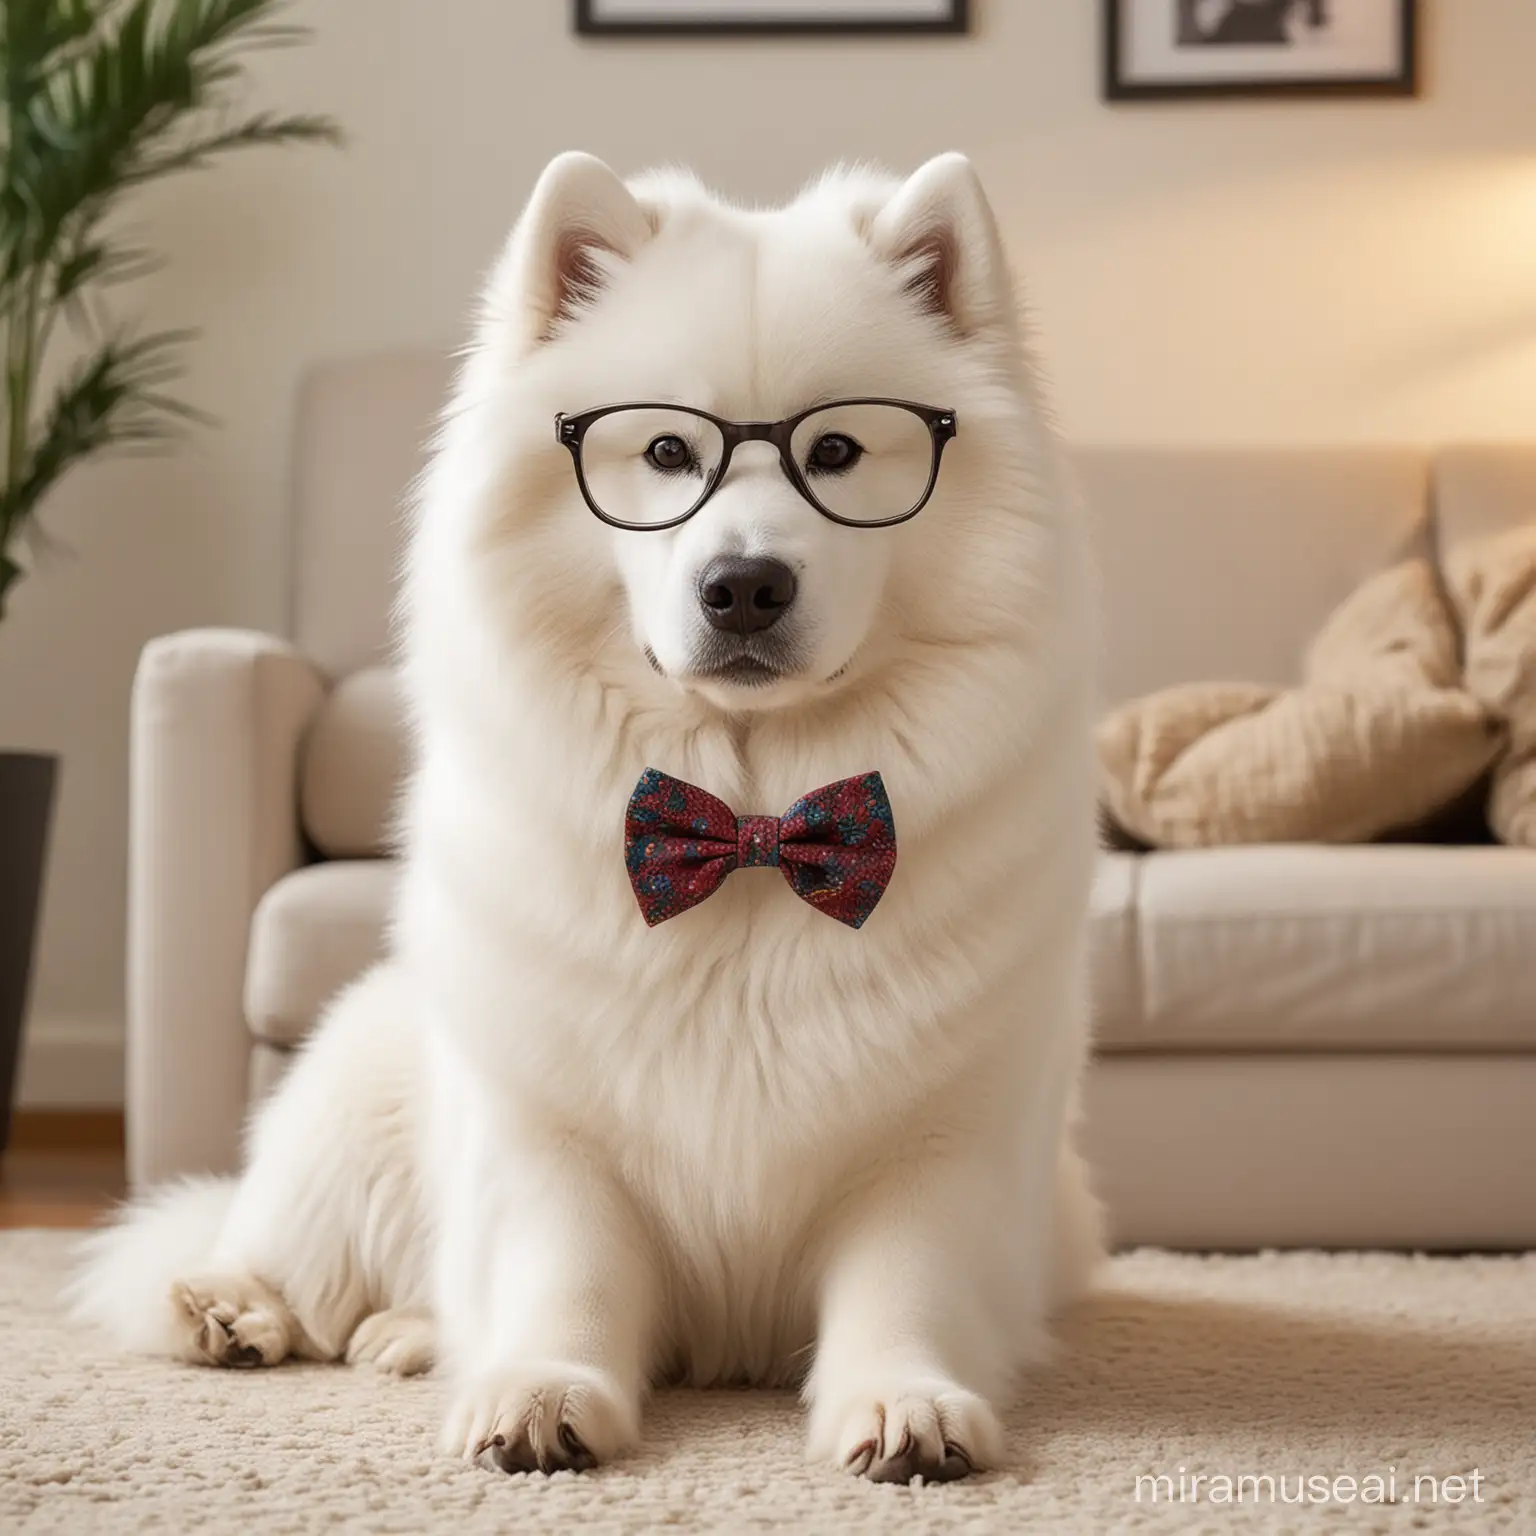 A fluffy Samoyed wearing a tiny bow tie and hipster glasses, sitting proudly in a modern living room.
